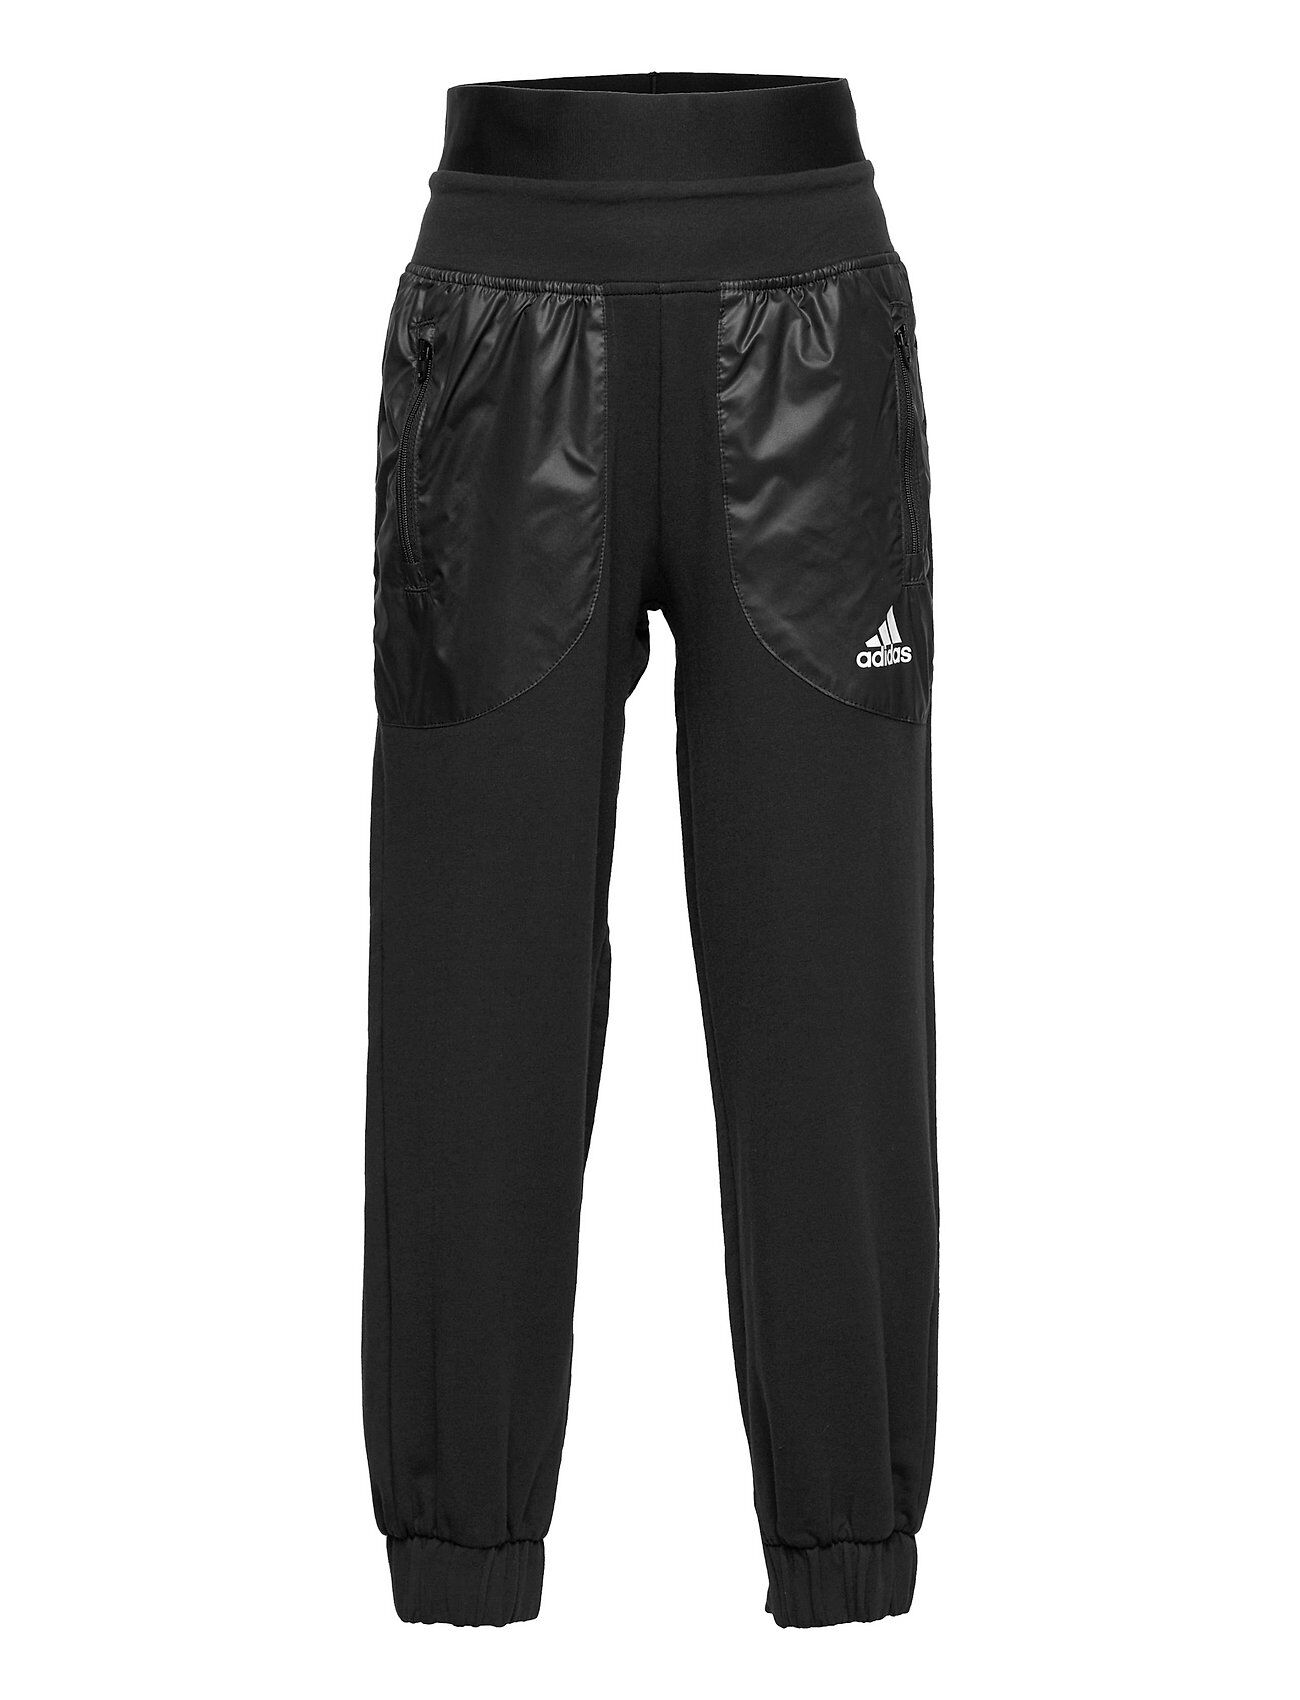 adidas Performance Relaxed Cotton Pants W Joggebukser Pysjbukser Svart Adidas Performance